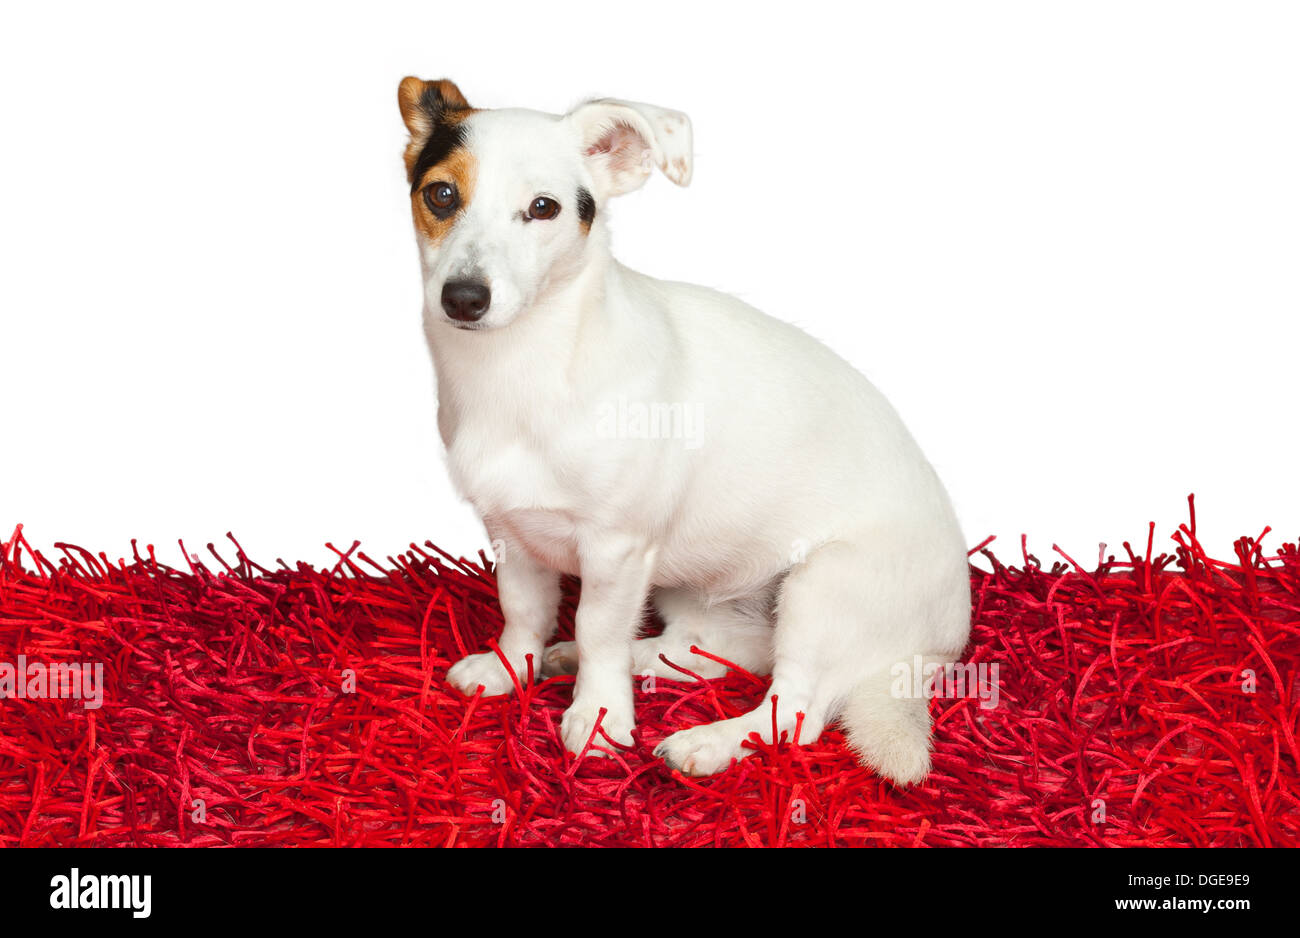 Jack russell terrier on a red carpet on white background Stock Photo